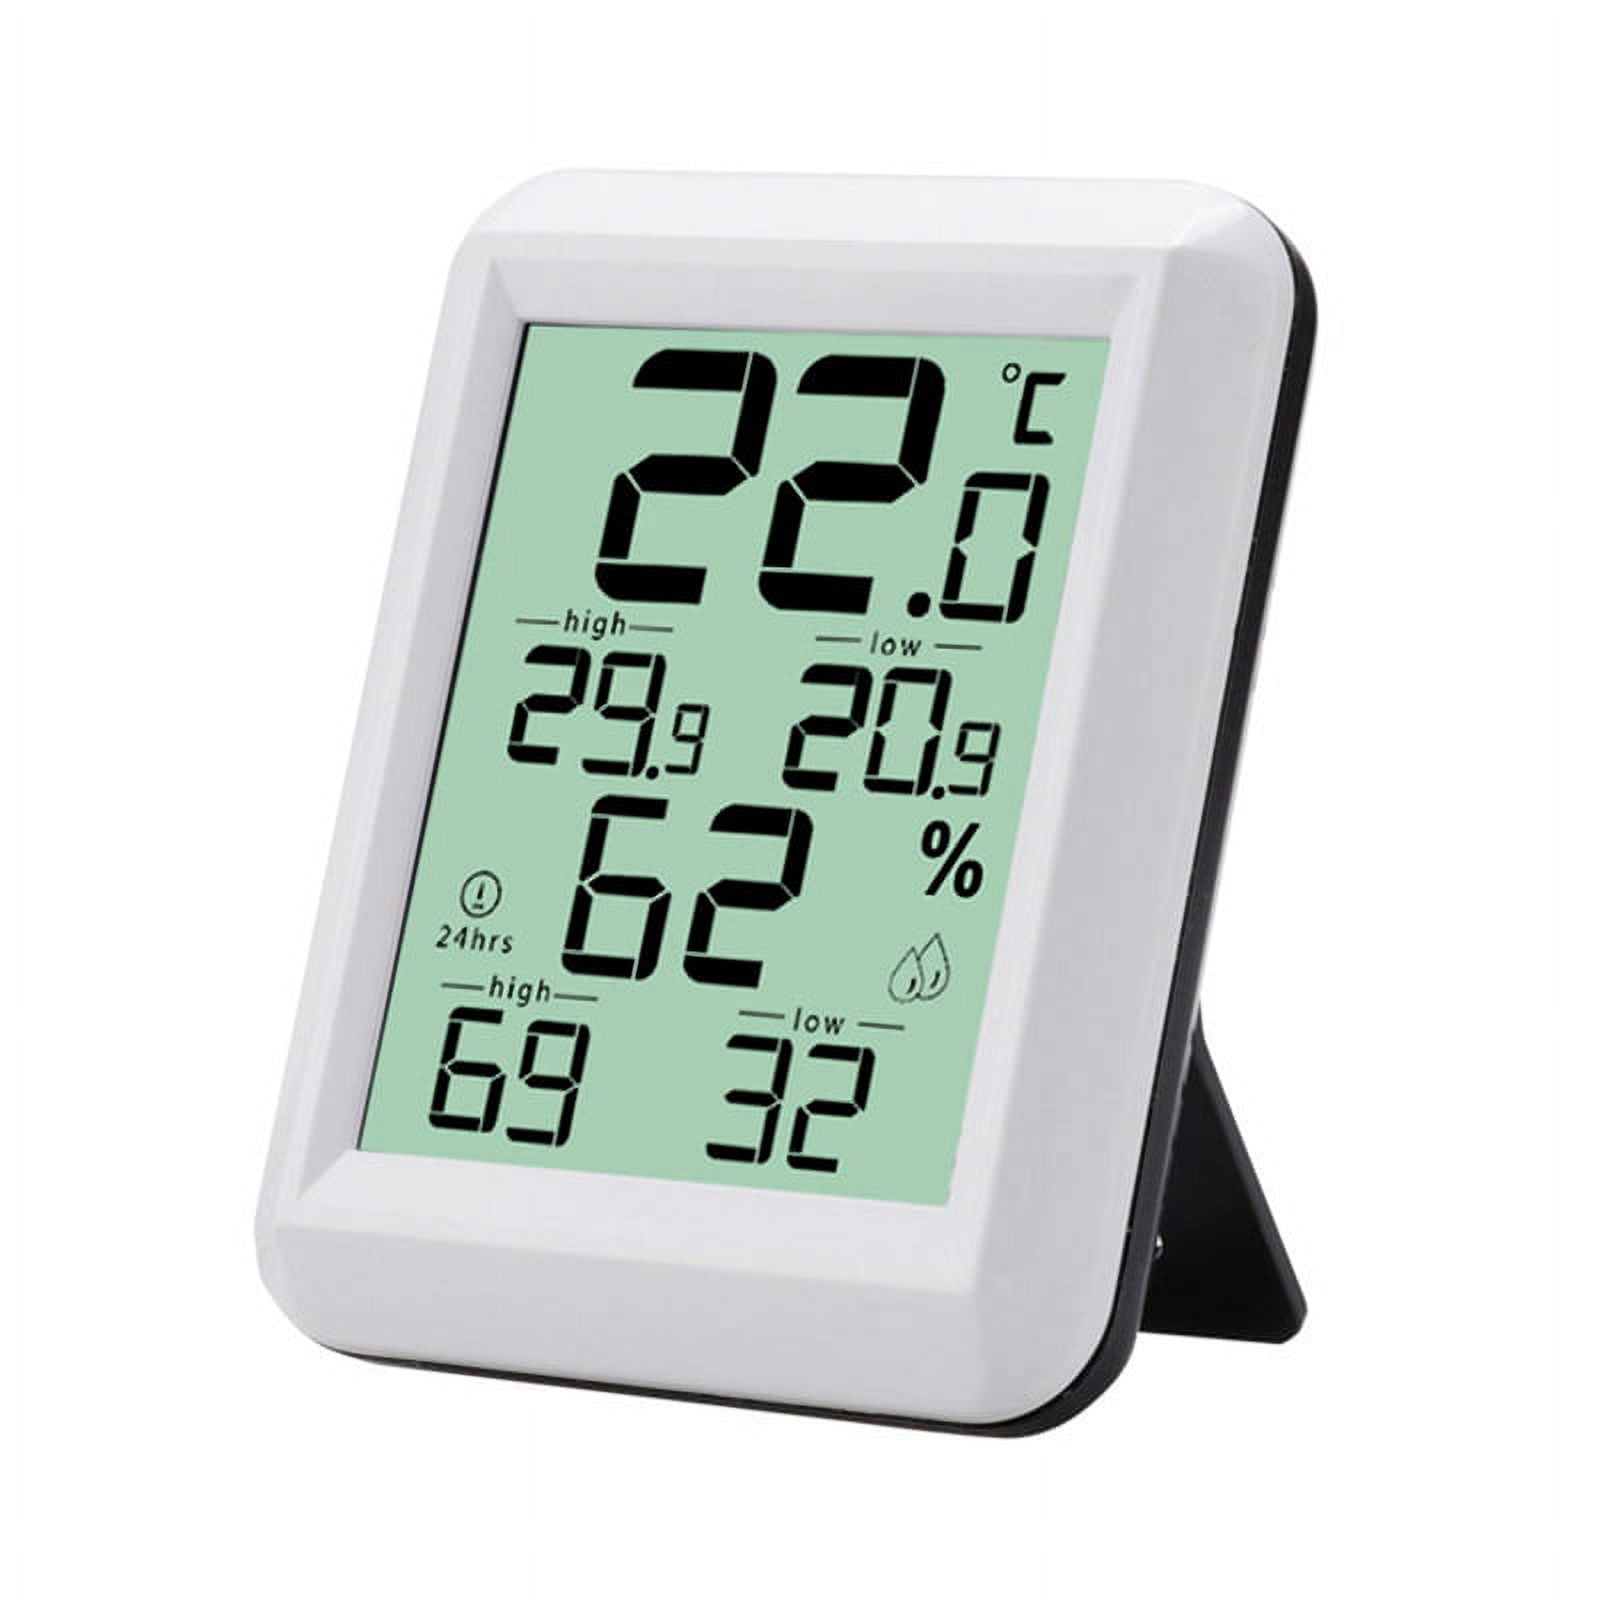 Digital Thermometer Hygrometer, Indoor Humidity Meter, Home Temperature  Thermometers Sensor Gauge,Baby Room, Outside 